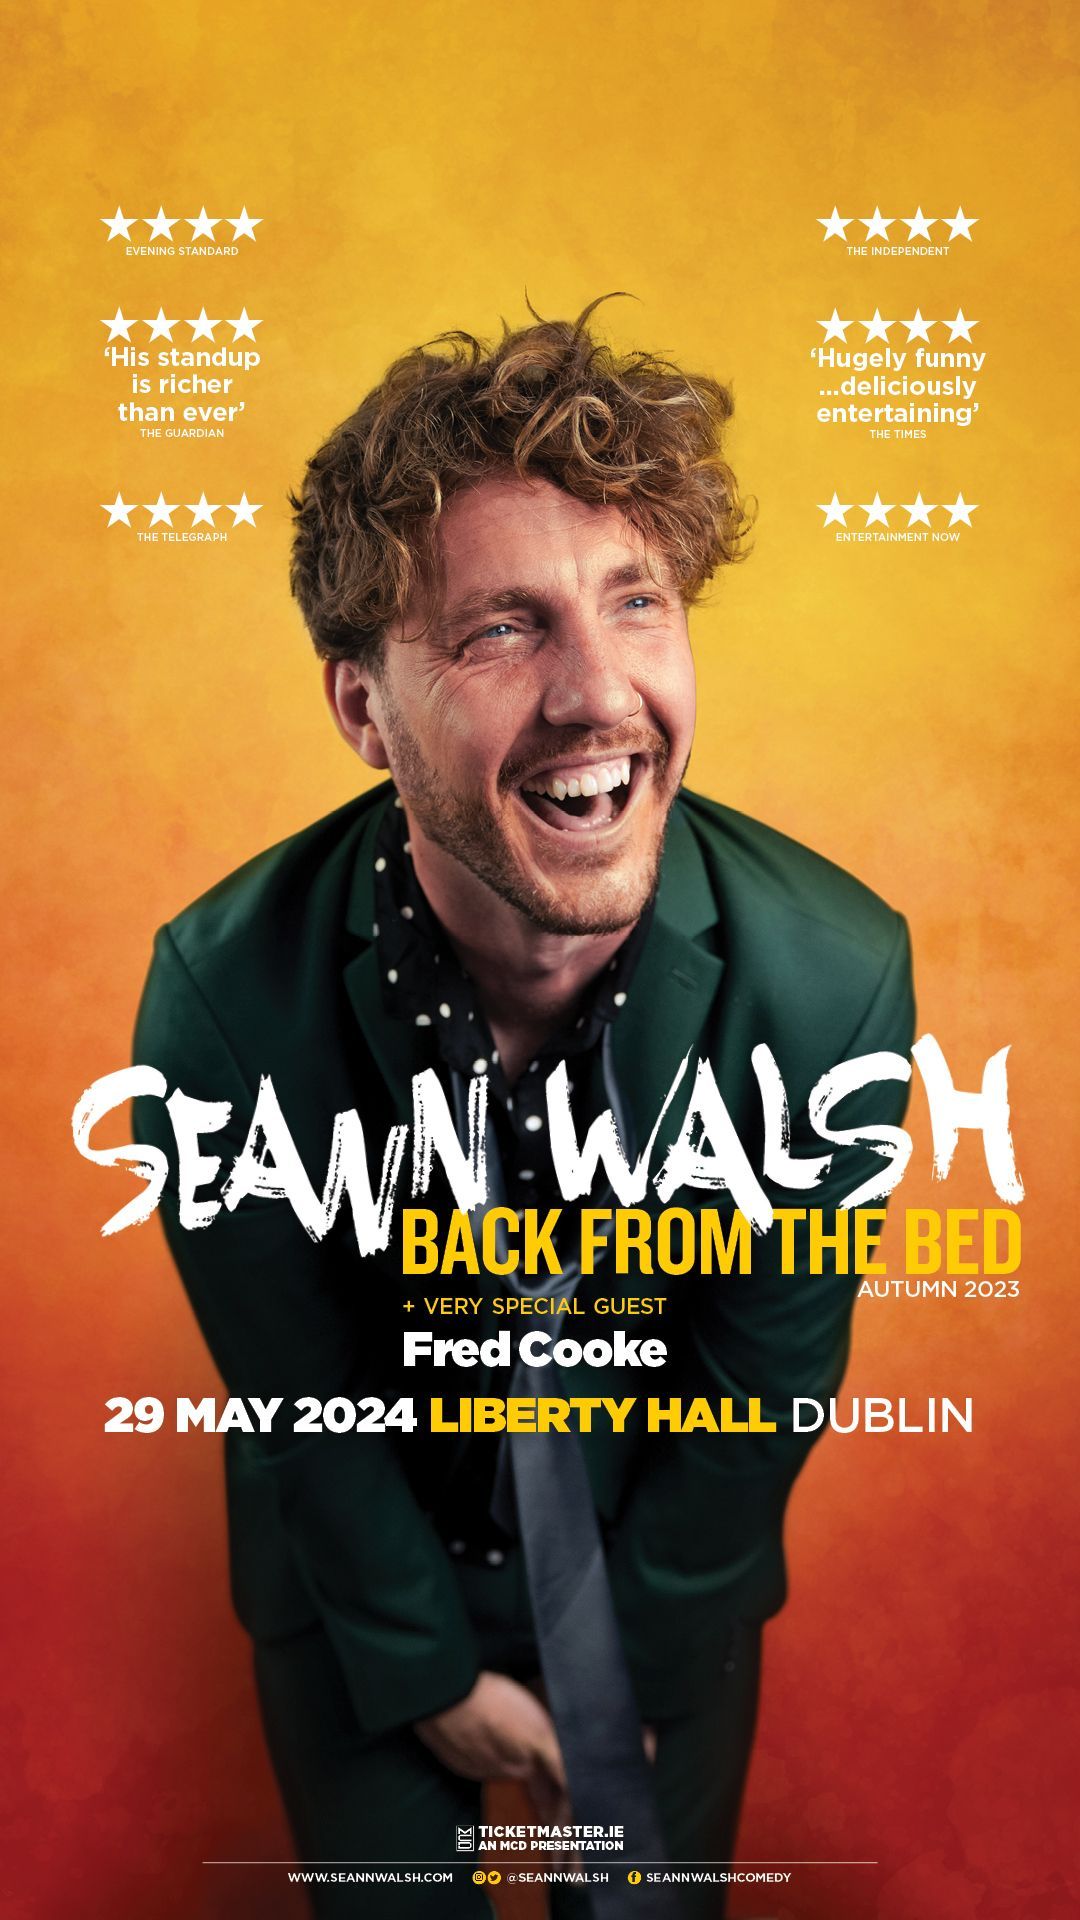 Seann Walsh brings his brand-new stand-up show Back from the Bed to Liberty Hall, Dublin on 29th May